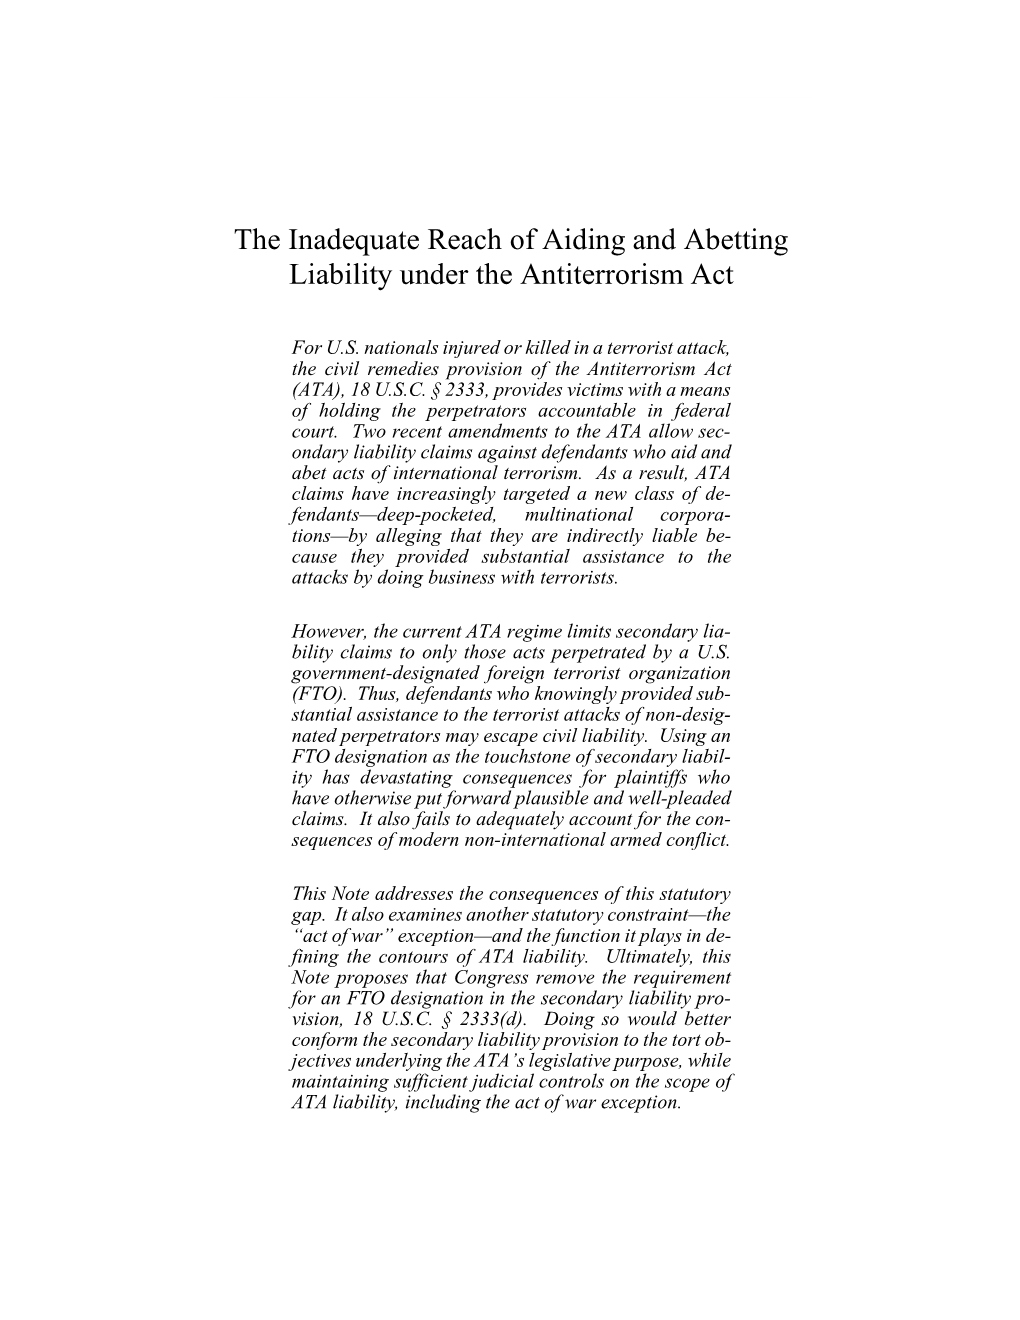 The Inadequate Reach of Aiding and Abetting Liability Under the Antiterrorism Act